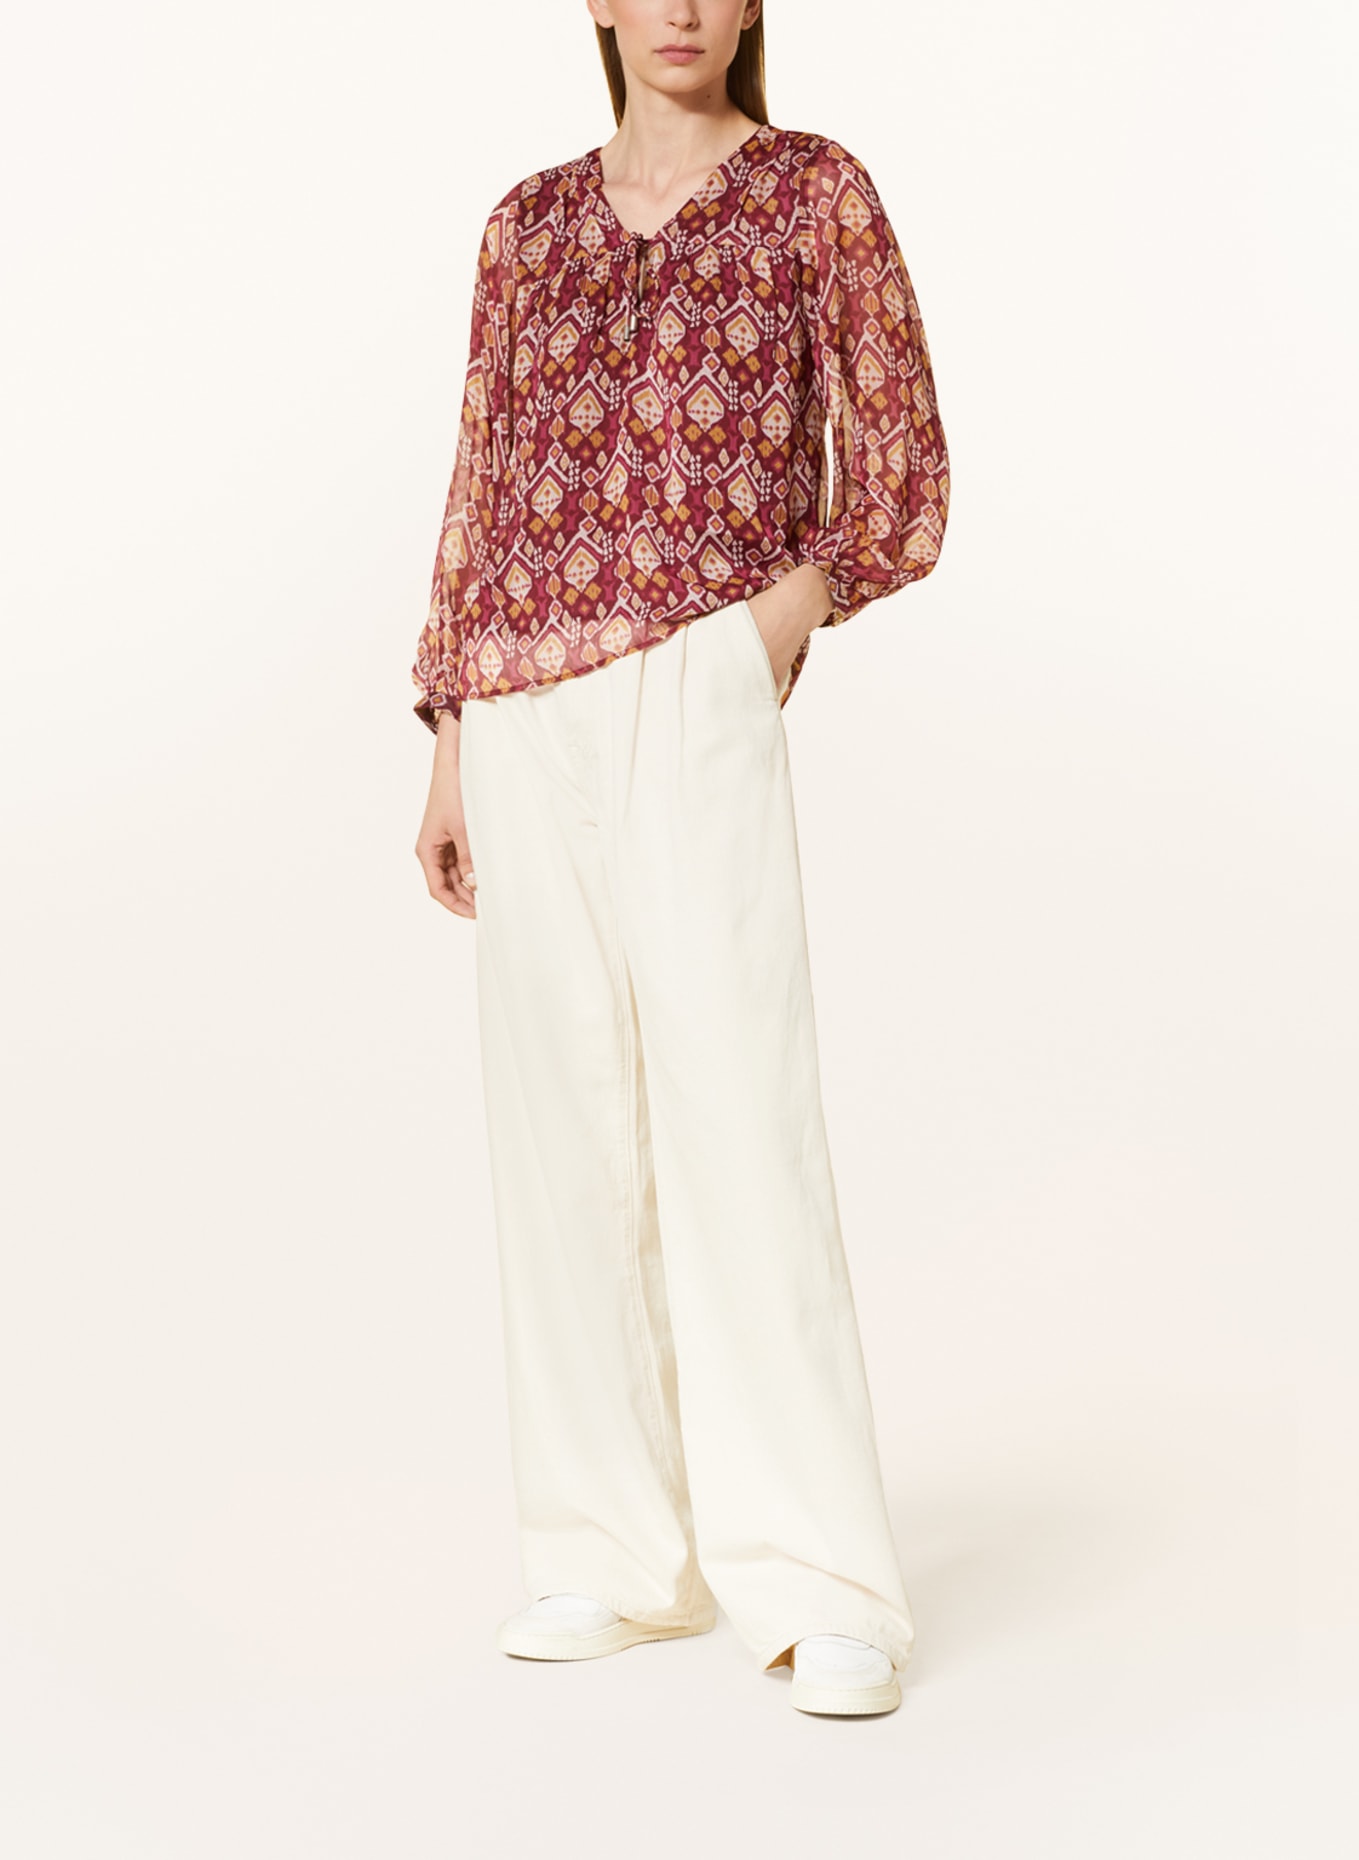 Pepe Jeans Shirt blouse GENNY, Color: DARK RED/ LIGHT RED/ DARK YELLOW (Image 2)